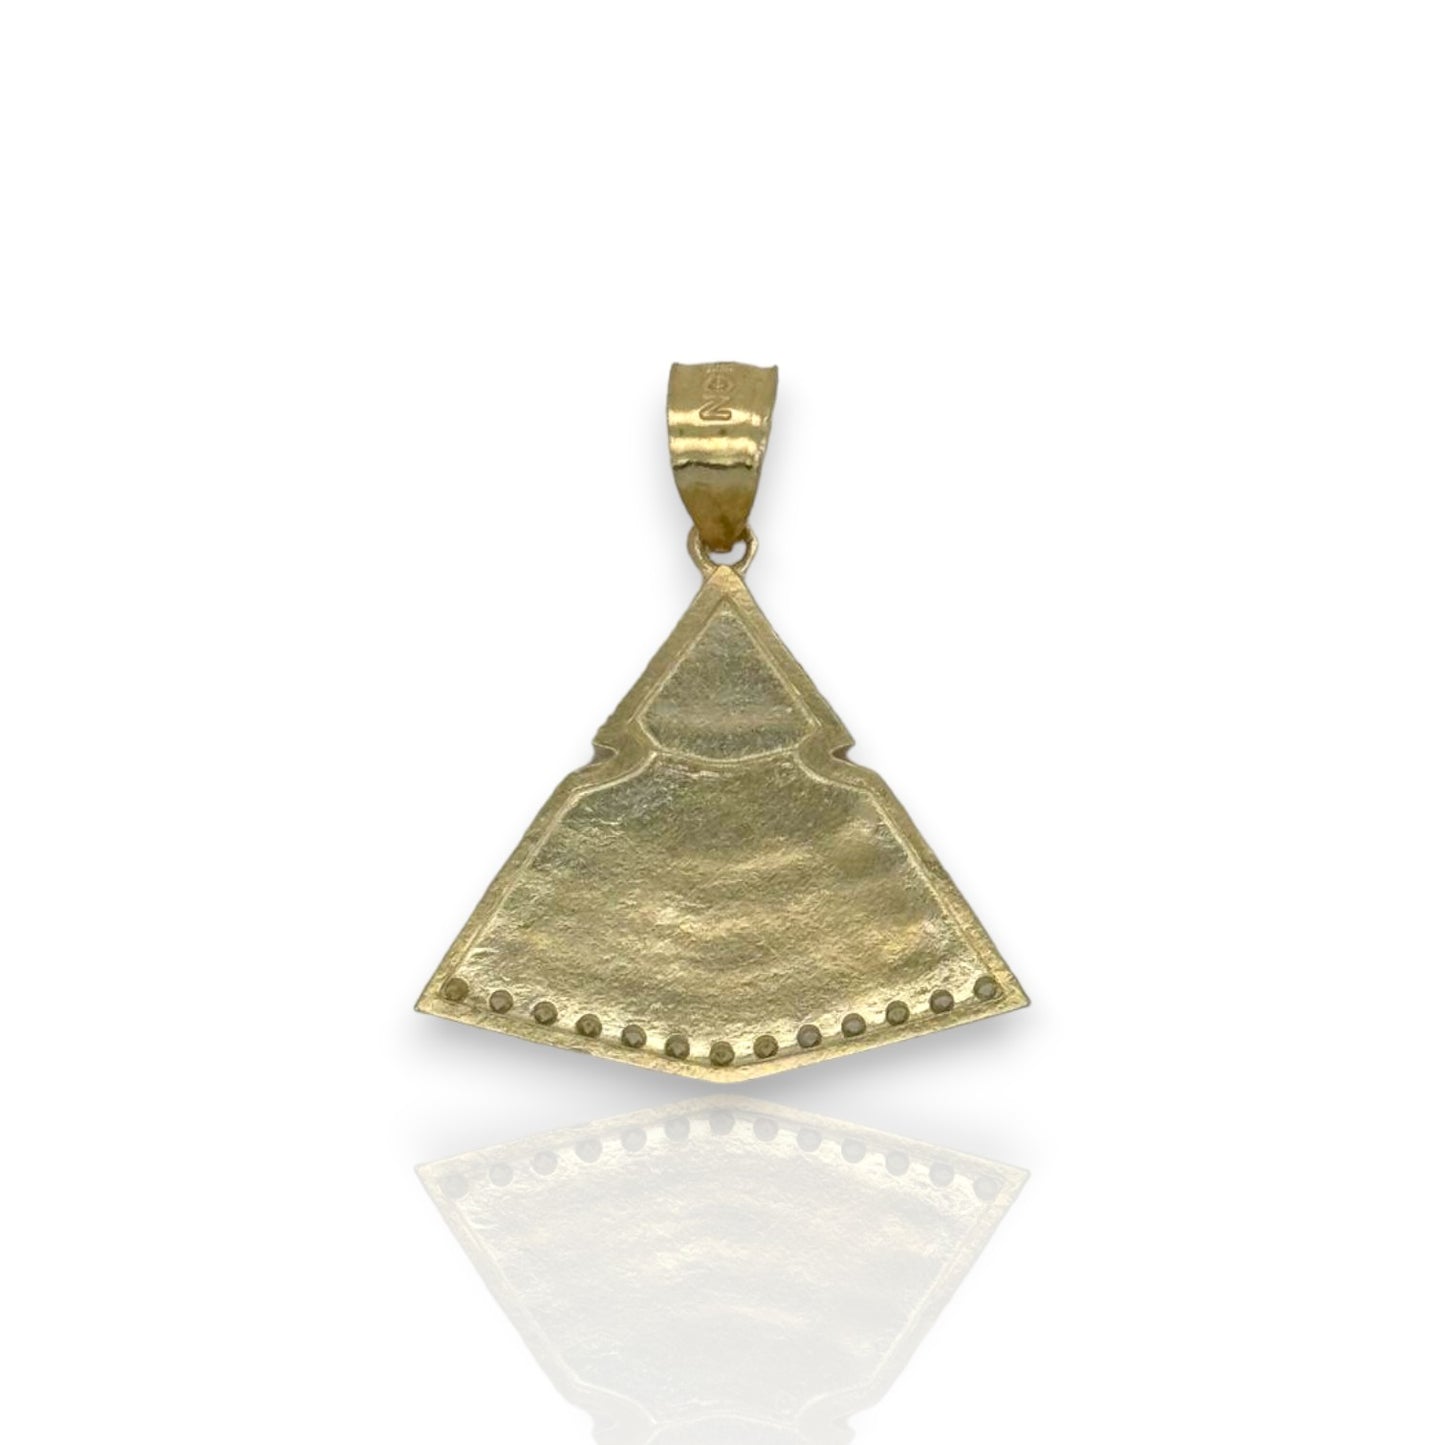 Pyramed Cz "All Seeing Eye" Pendant - 10K Yellow Gold